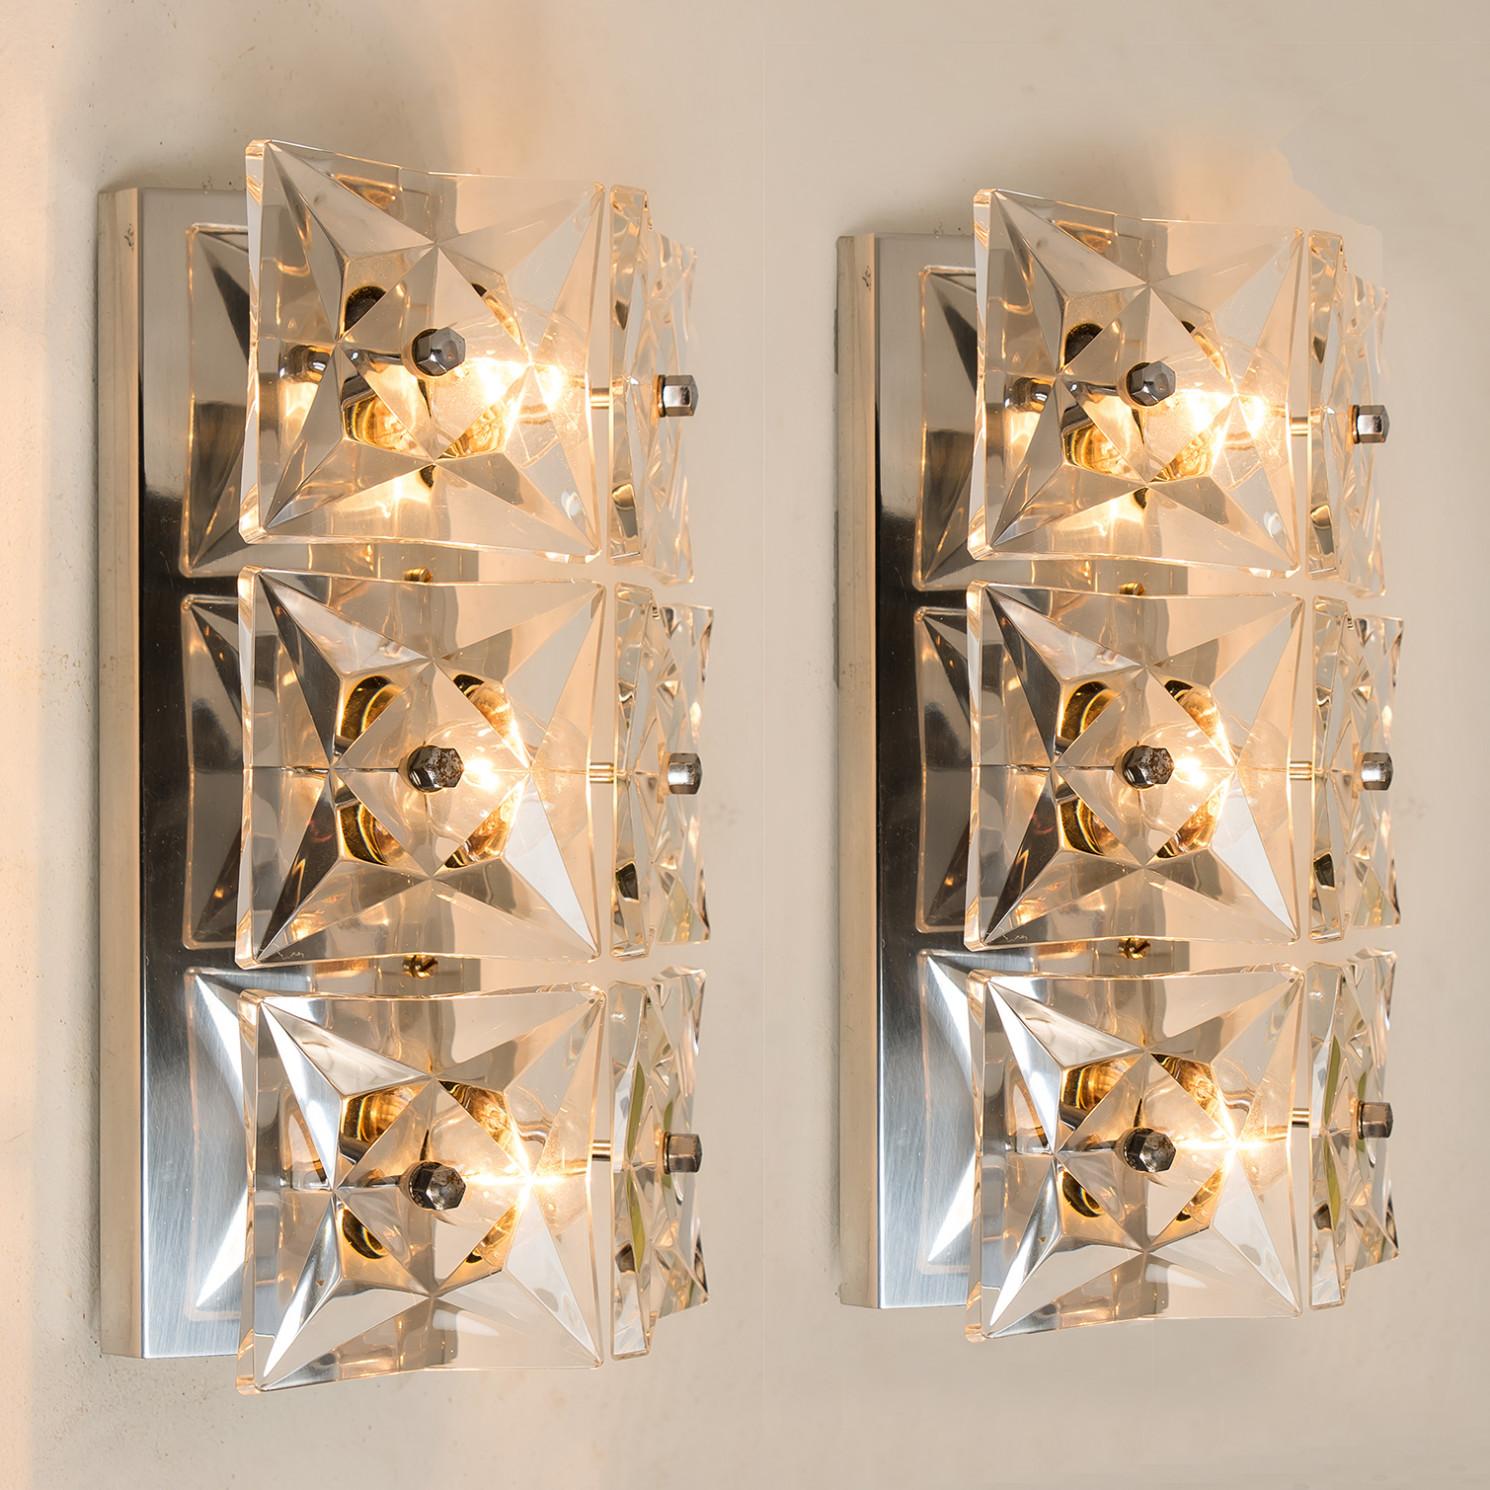 1 of the 2 pairs of wall light fixtures by Kinkeldey, Germany, manufactured in the mid century, circa 1970 (late 1960s or early 1970s). Really heavy quality. They are comfortable with all decor periods. This wall lights are executed to a very high